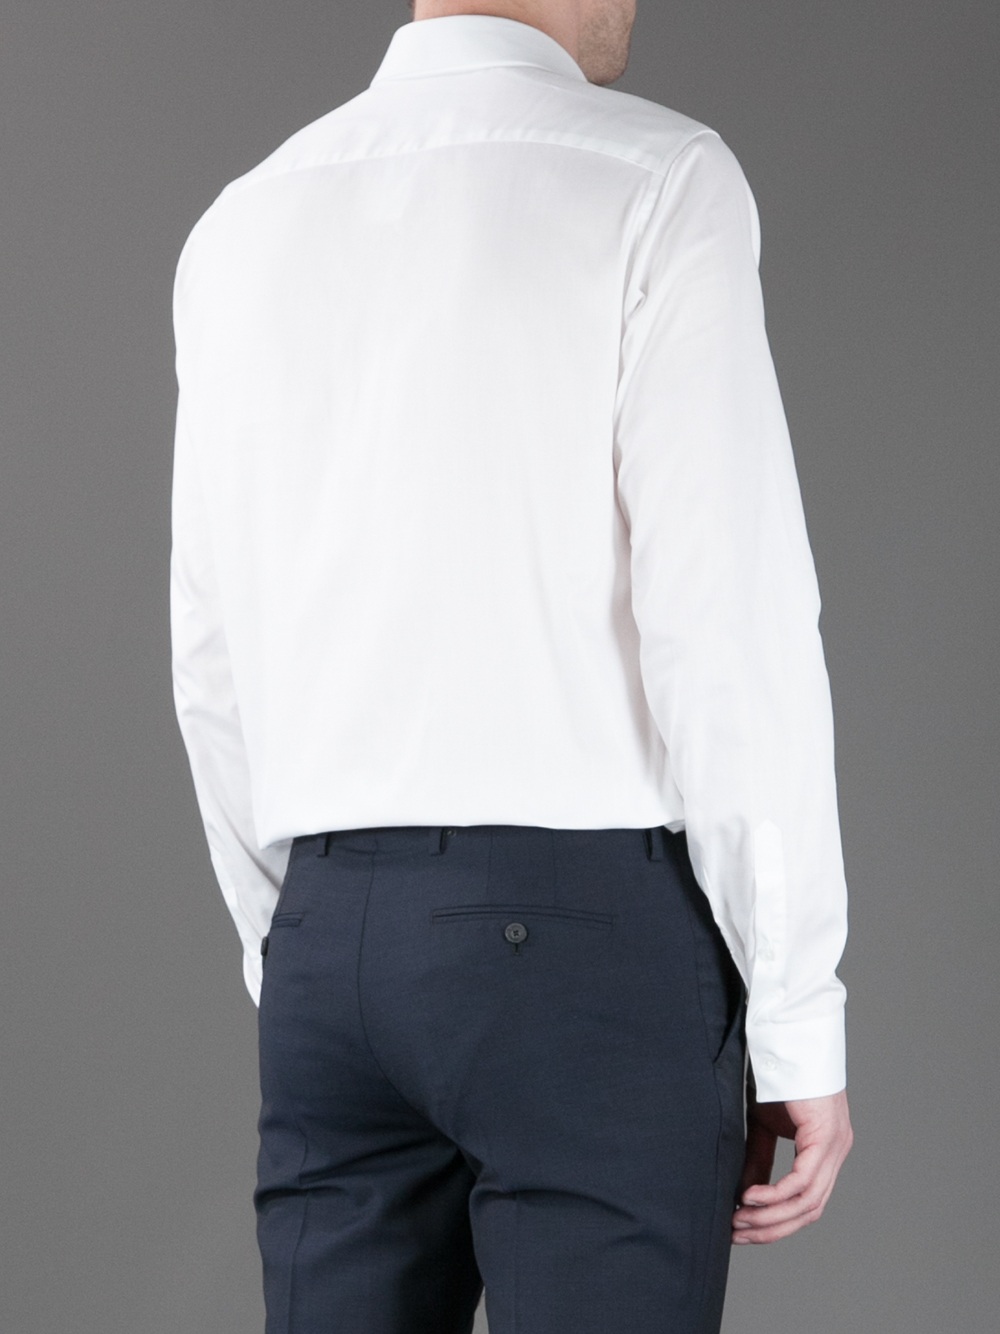 KENZO Button Up Shirt in White for Men - Lyst